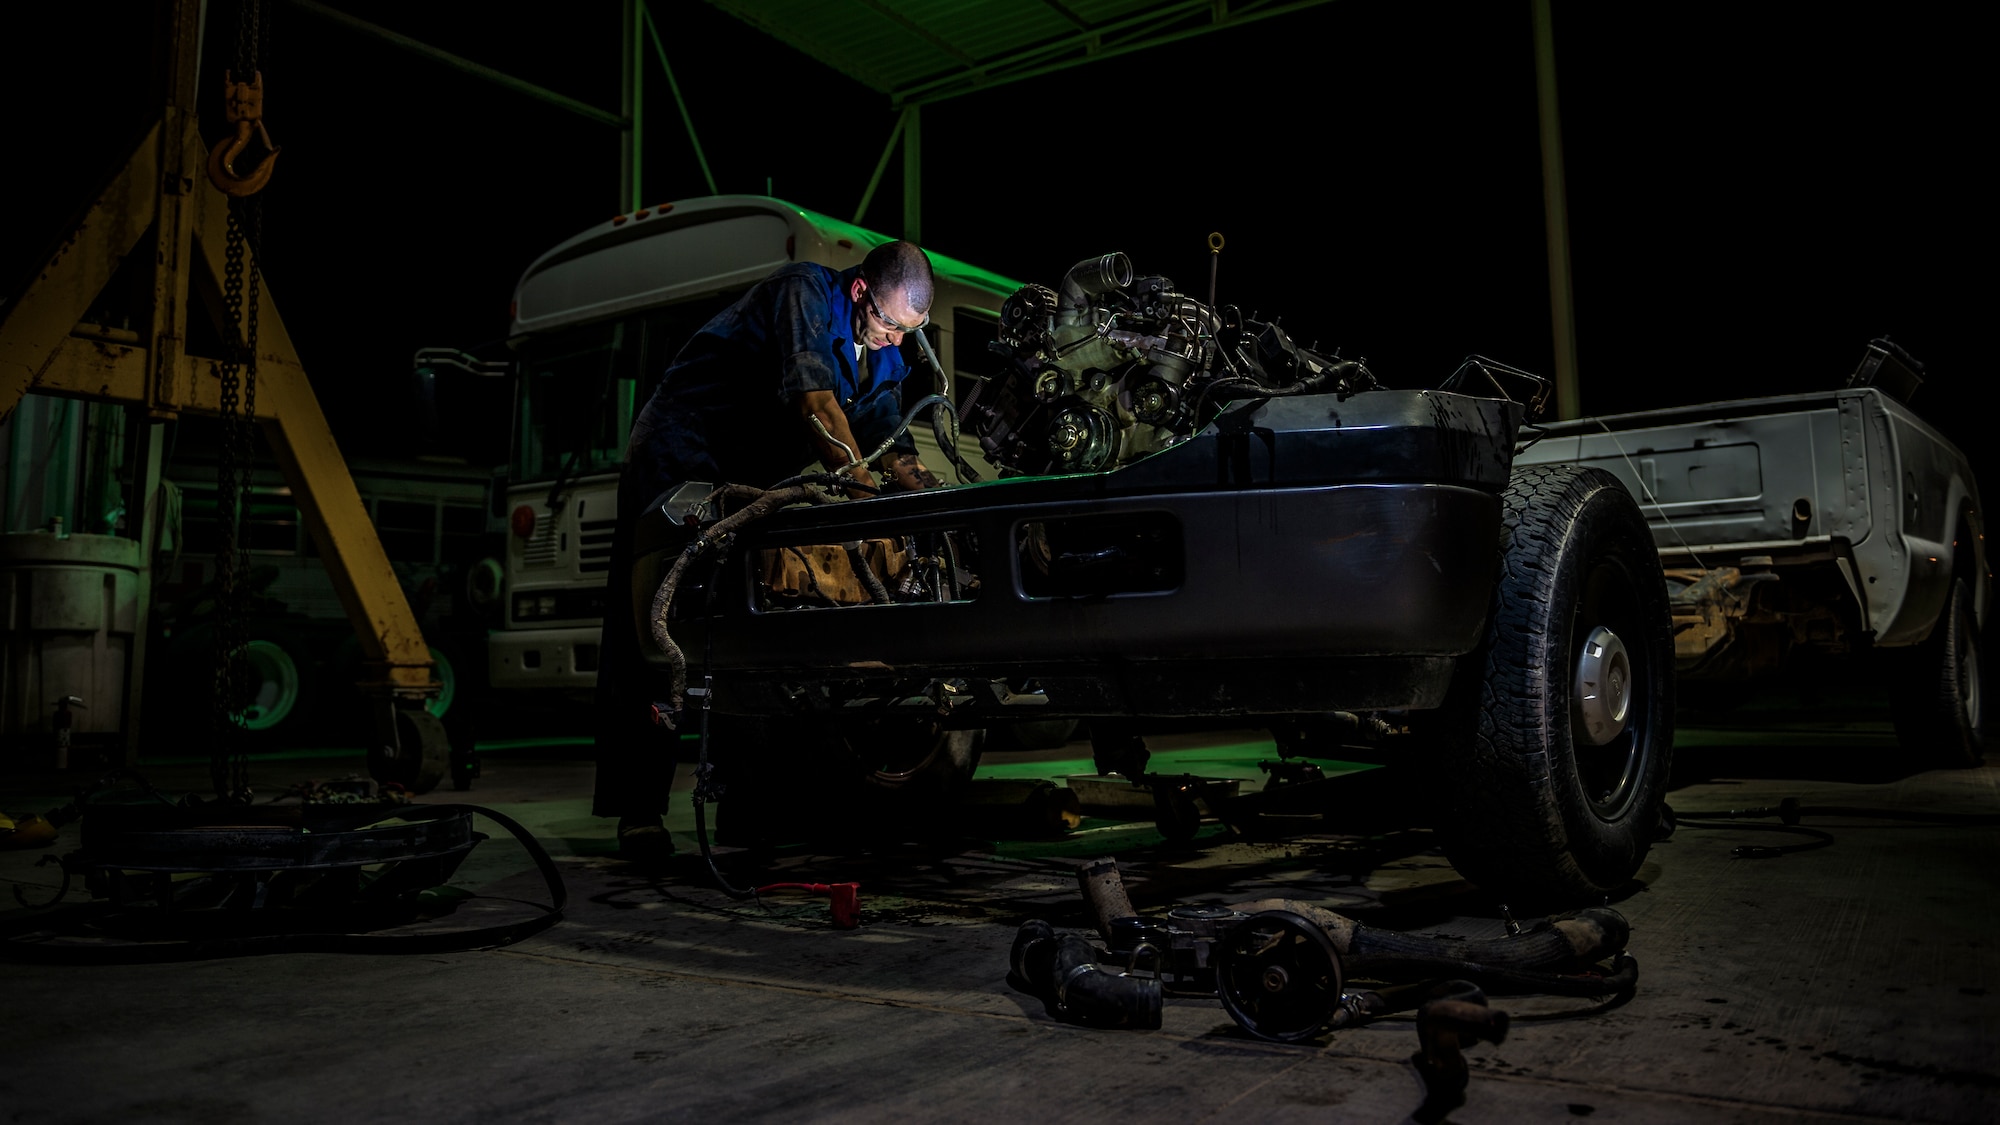 Senior Airman Christopher Moore removes the engine of a truck July 18, 2014, at an undisclosed location in Southwest Asia. Moore, a vehicle mechanic with the 386th Expeditionary Logistics Readiness Squadron, deployed from the 86th Vehicle Readiness Squadron, Ramstein Air Base, Germany in support of Operation Enduring Freedom. (U.S. Air Force photo/Staff Sgt. Jeremy Bowcock)